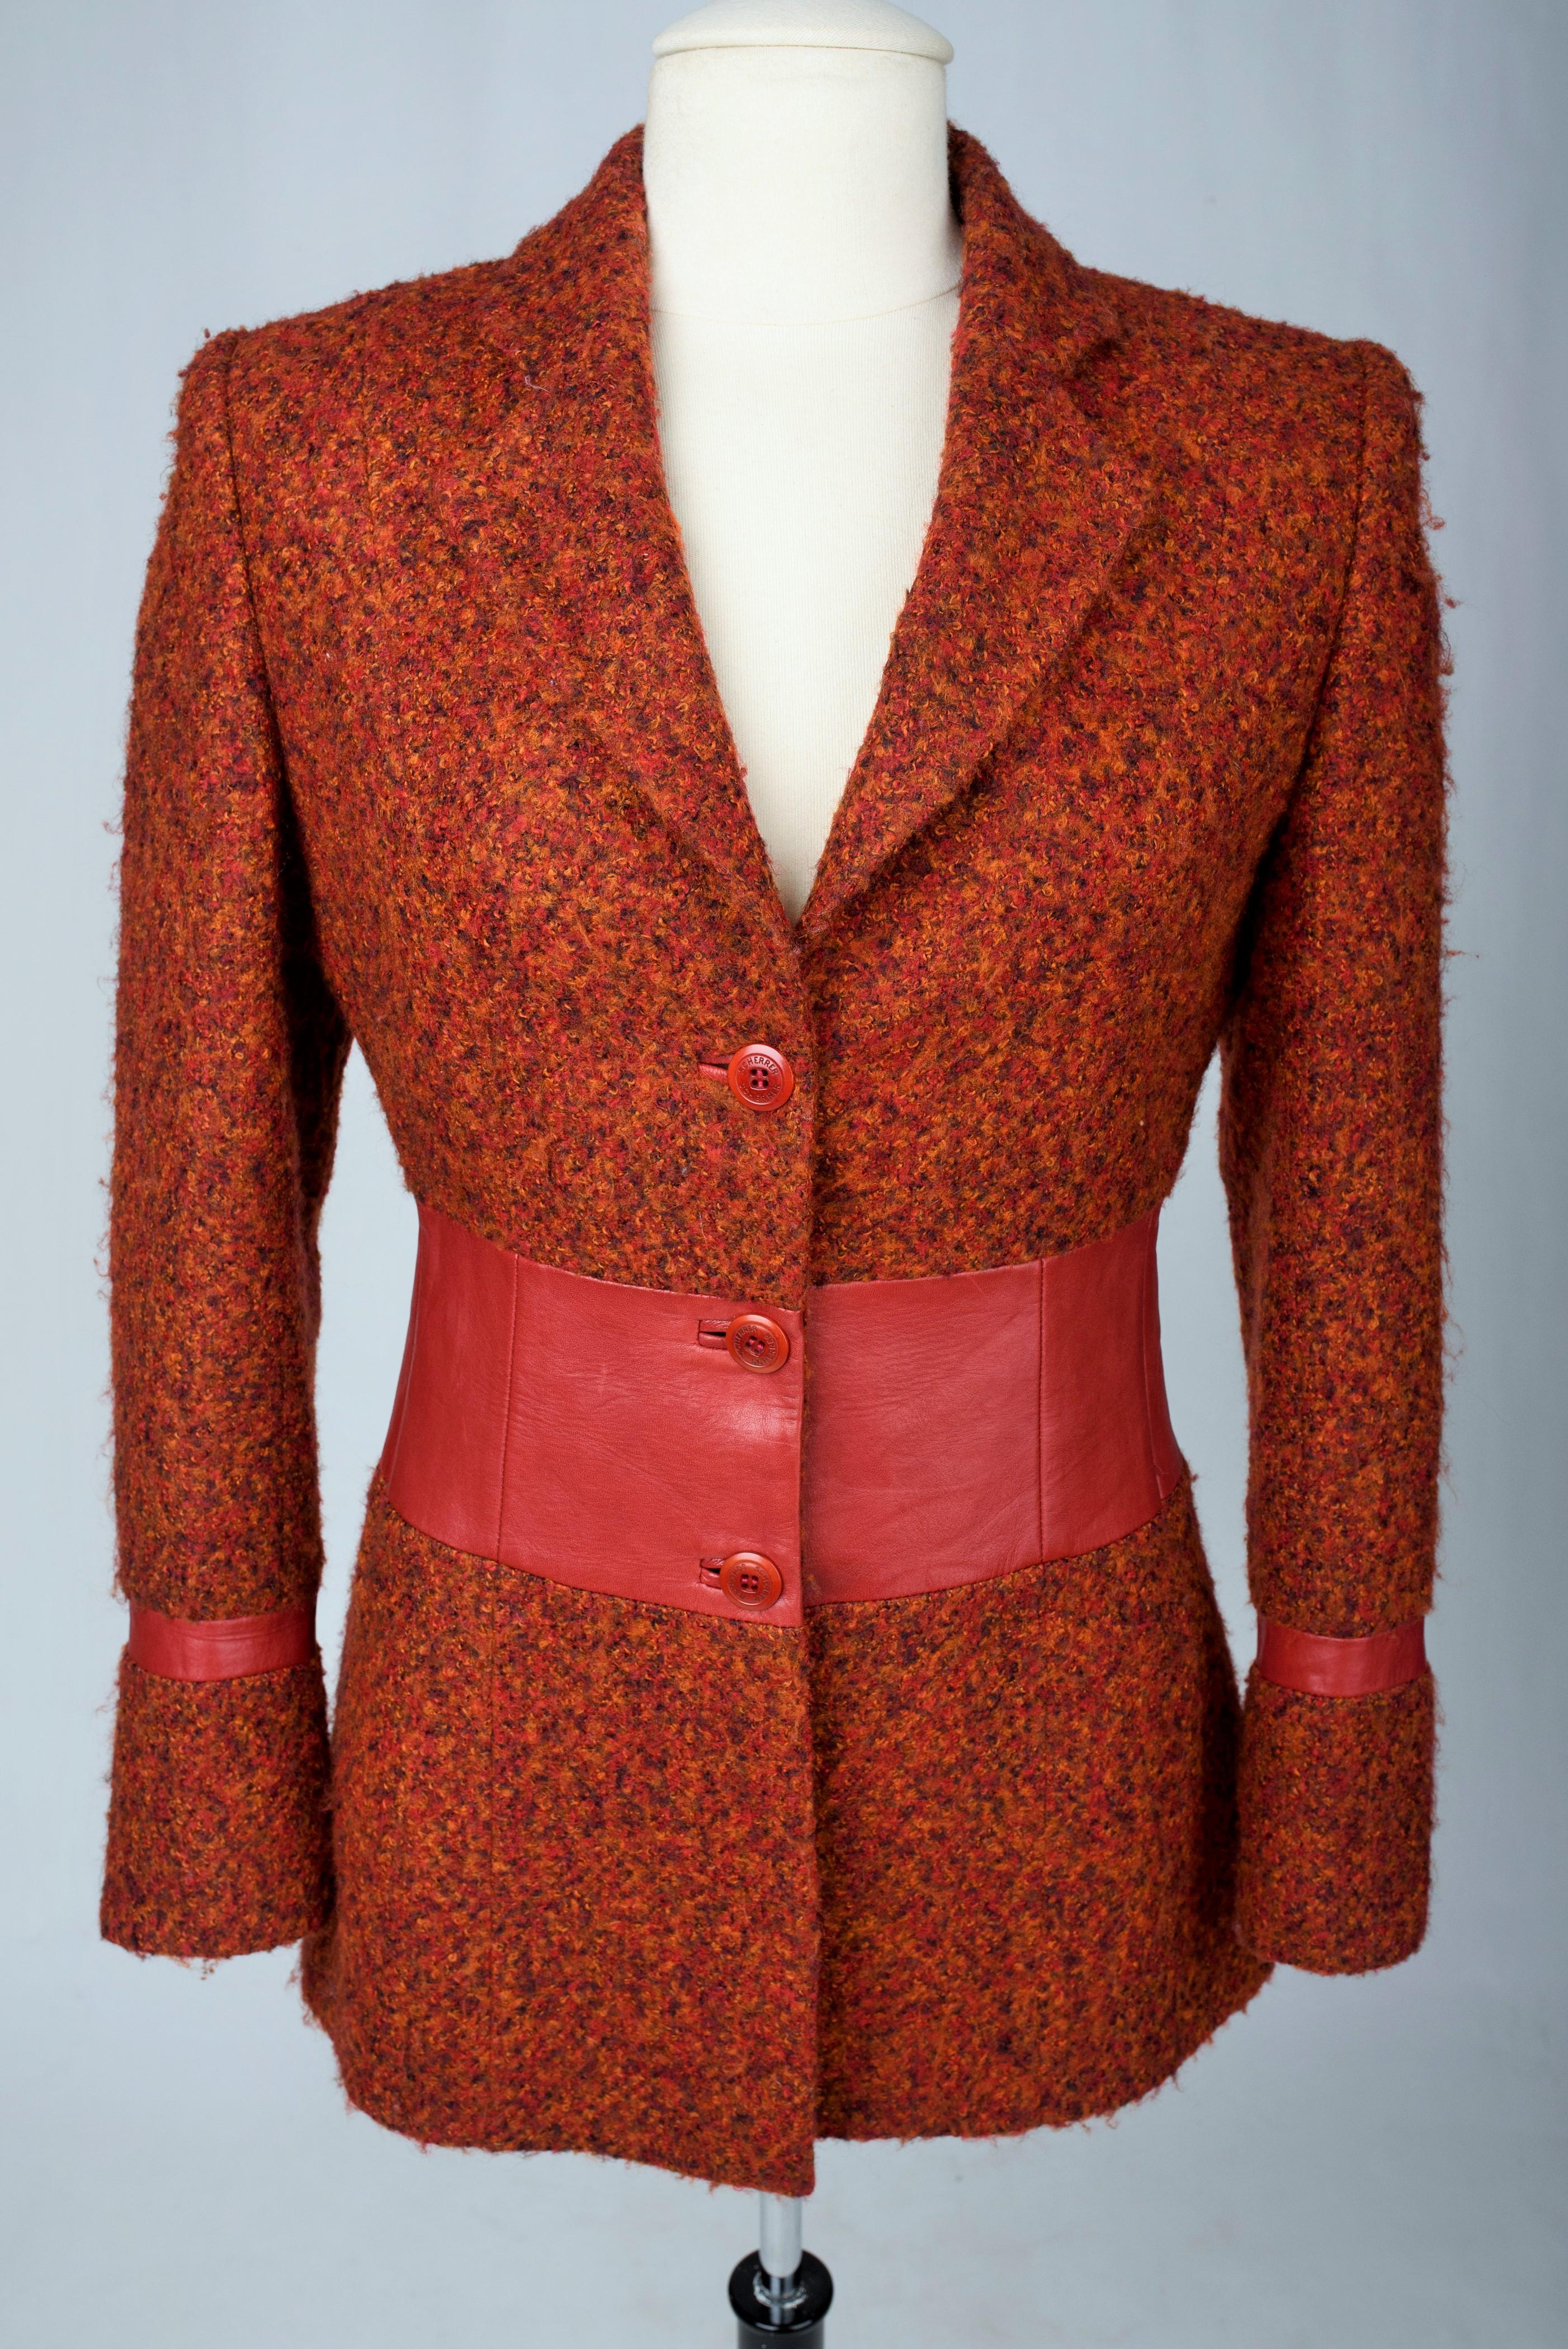 Looped wool and leather jacket by Jean-Louis Sherrer  French Circa 2000 - 2010 For Sale 2